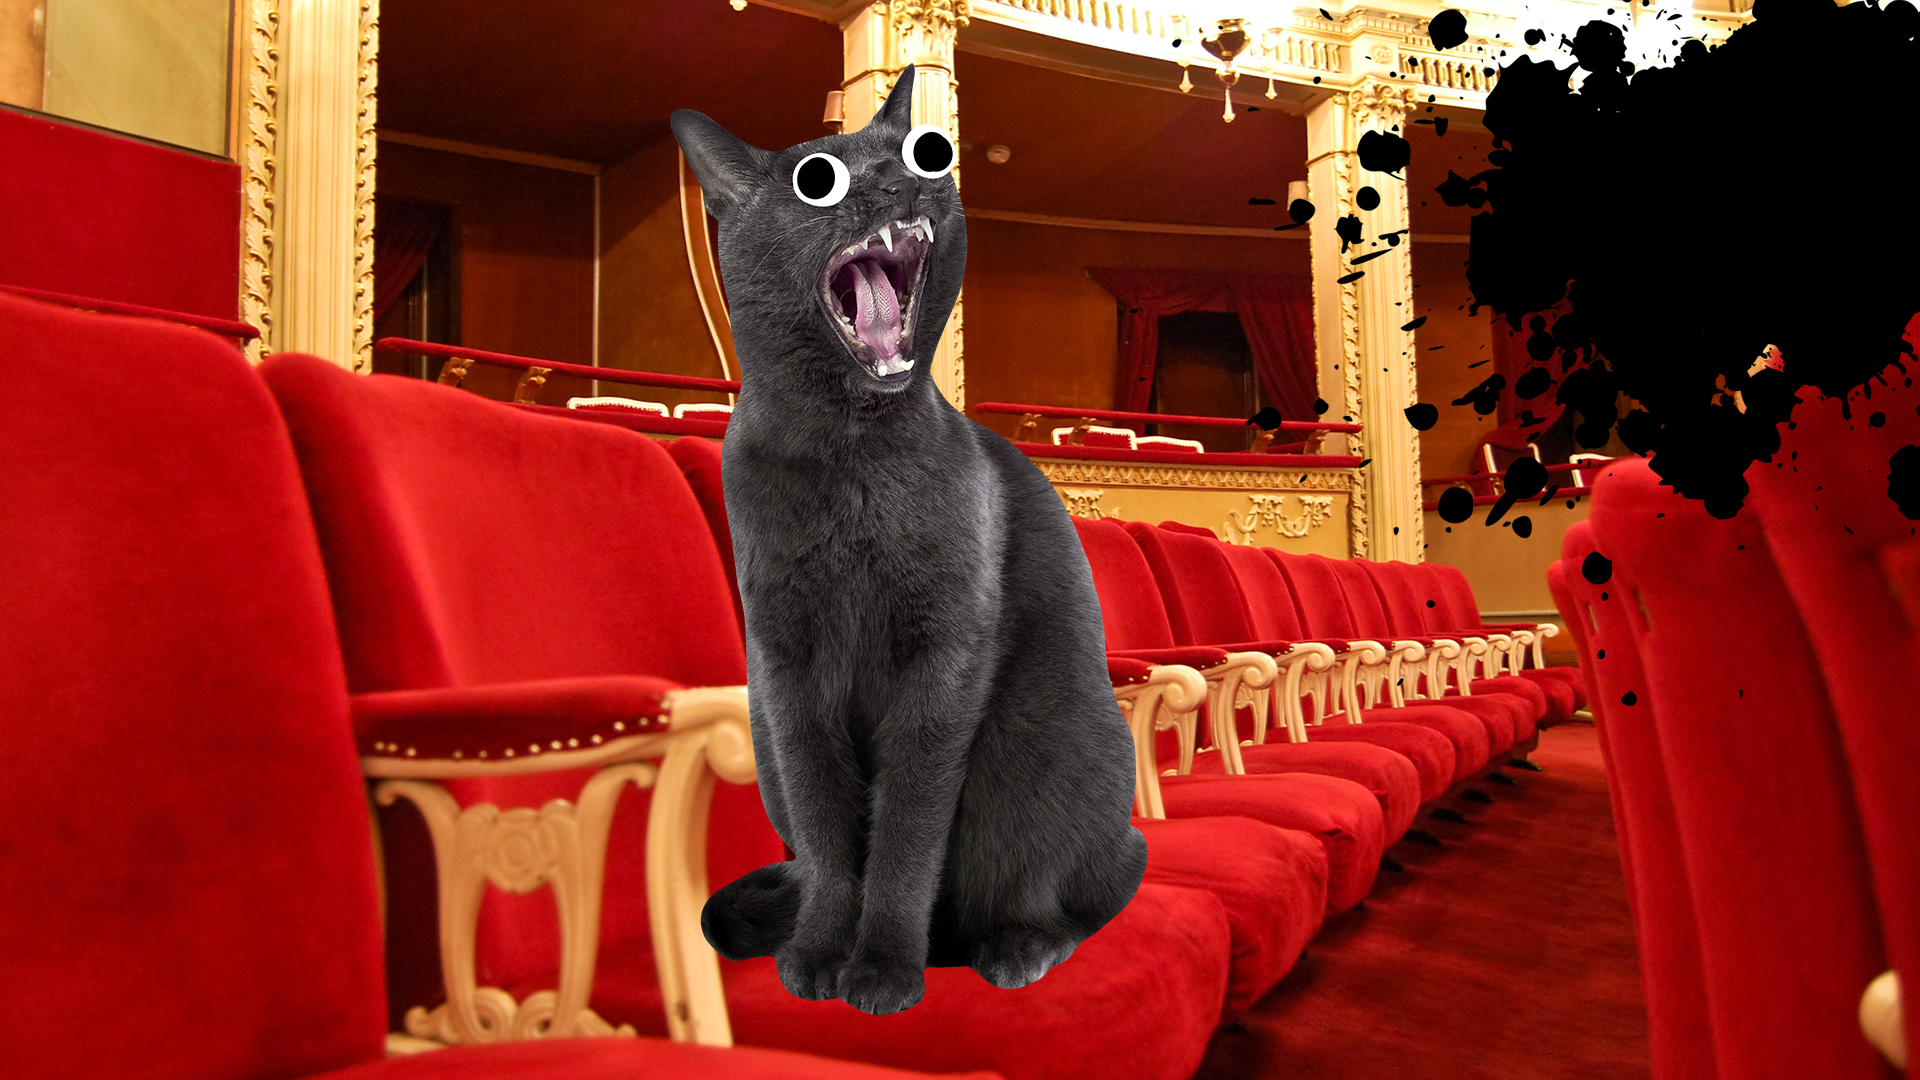 A cat meowing in a theatre